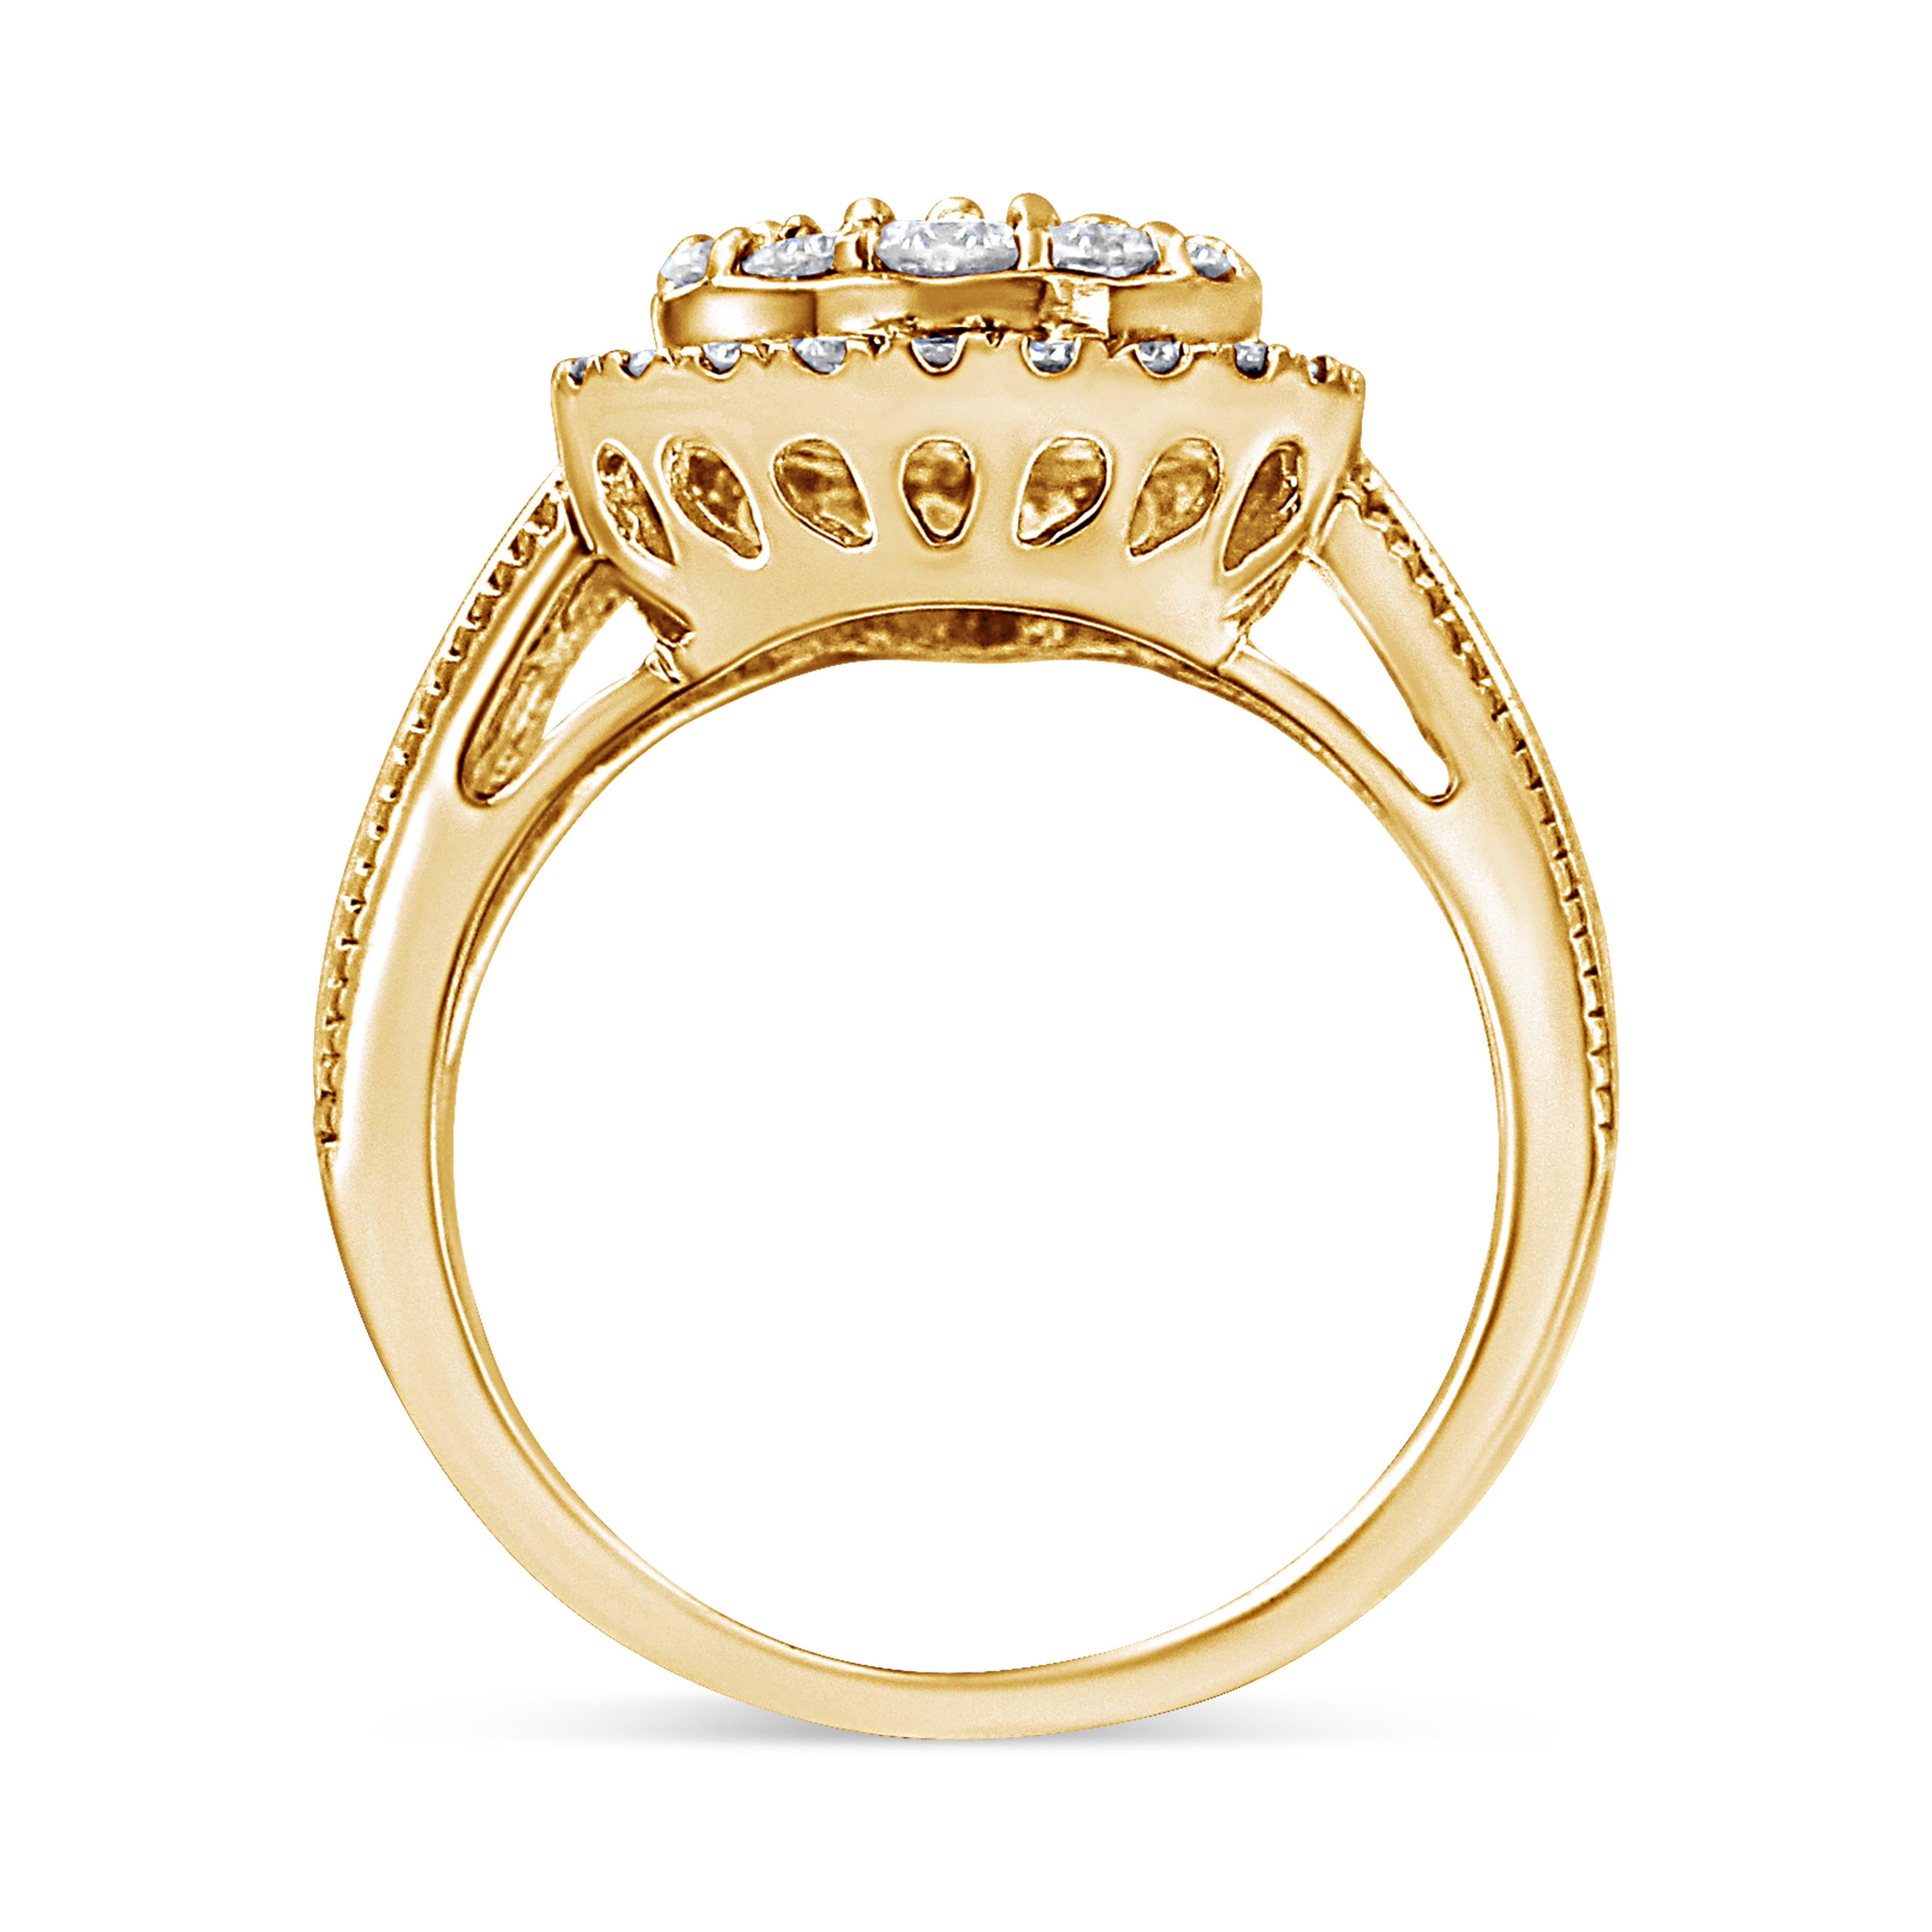 Contemporary 10k Yellow Gold Over Silver 1 1/2 Carat Round-Cut Diamond Cocktail Ring For Sale